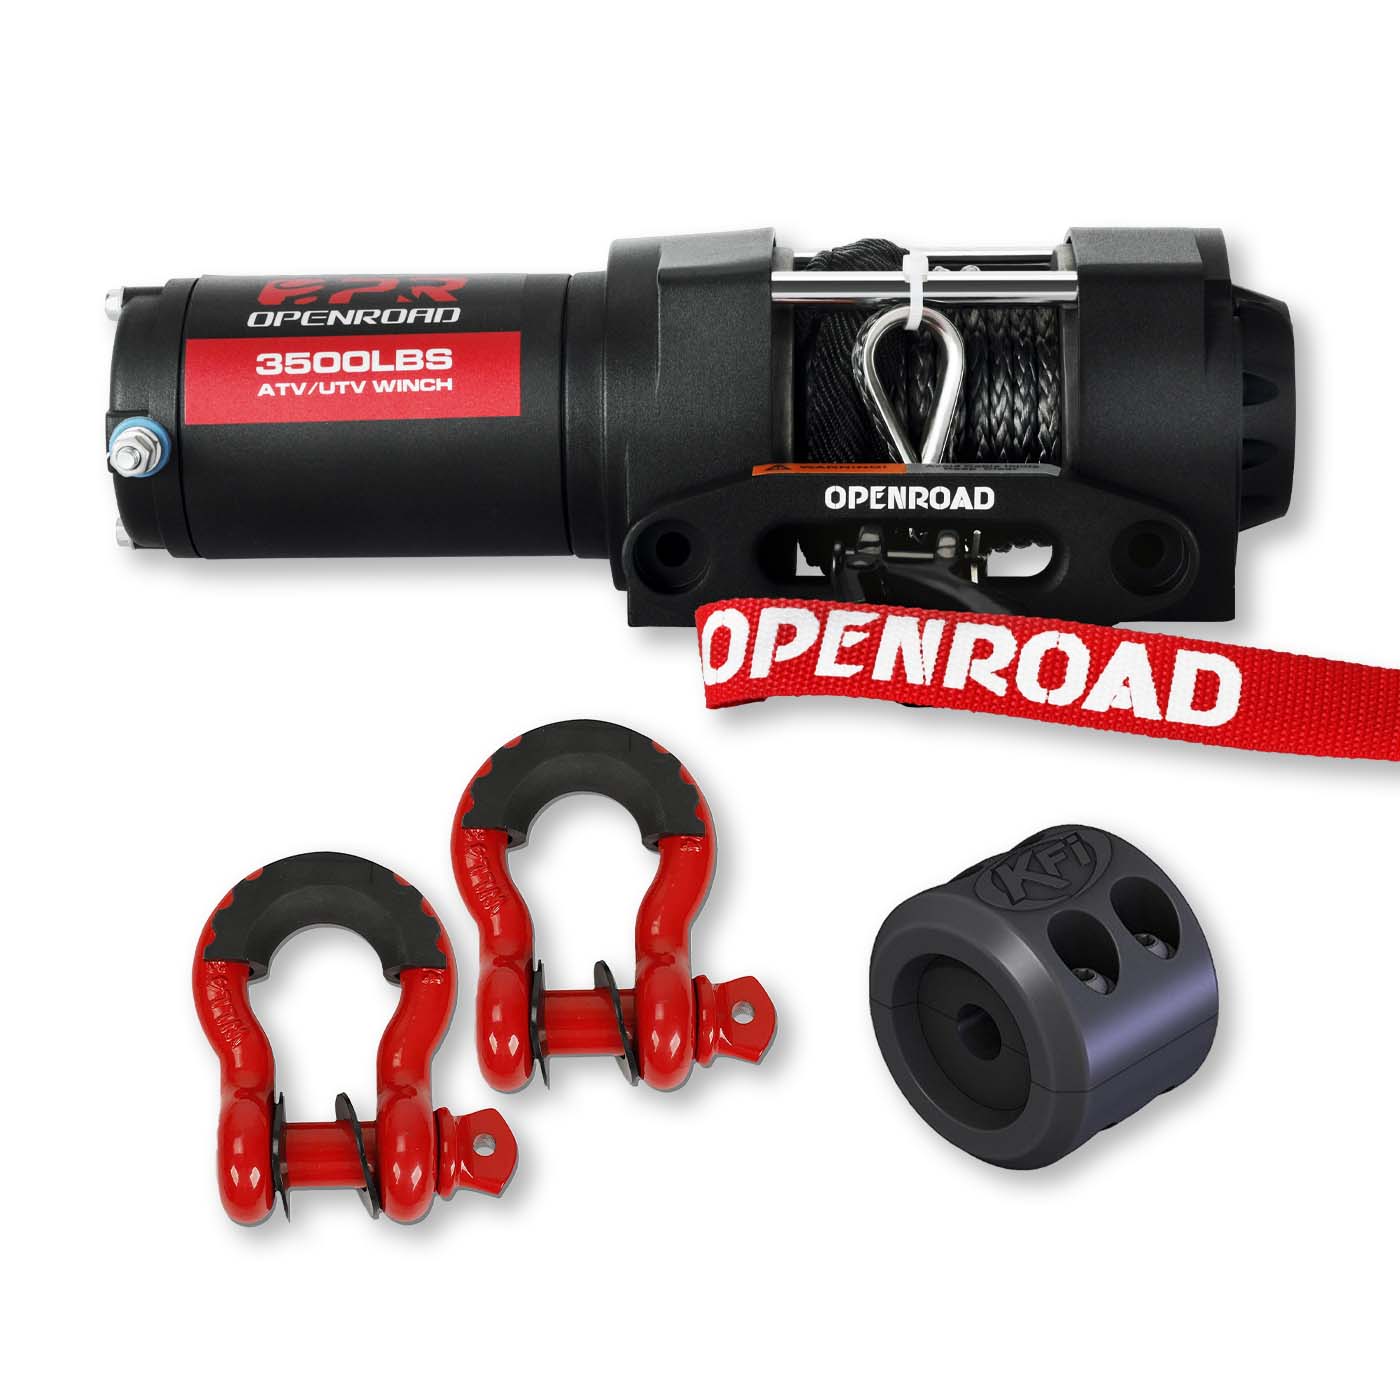 3500lbs Electric Winch +3/4" D-ring shackle+winch cable stopper  openroad4wd.com   